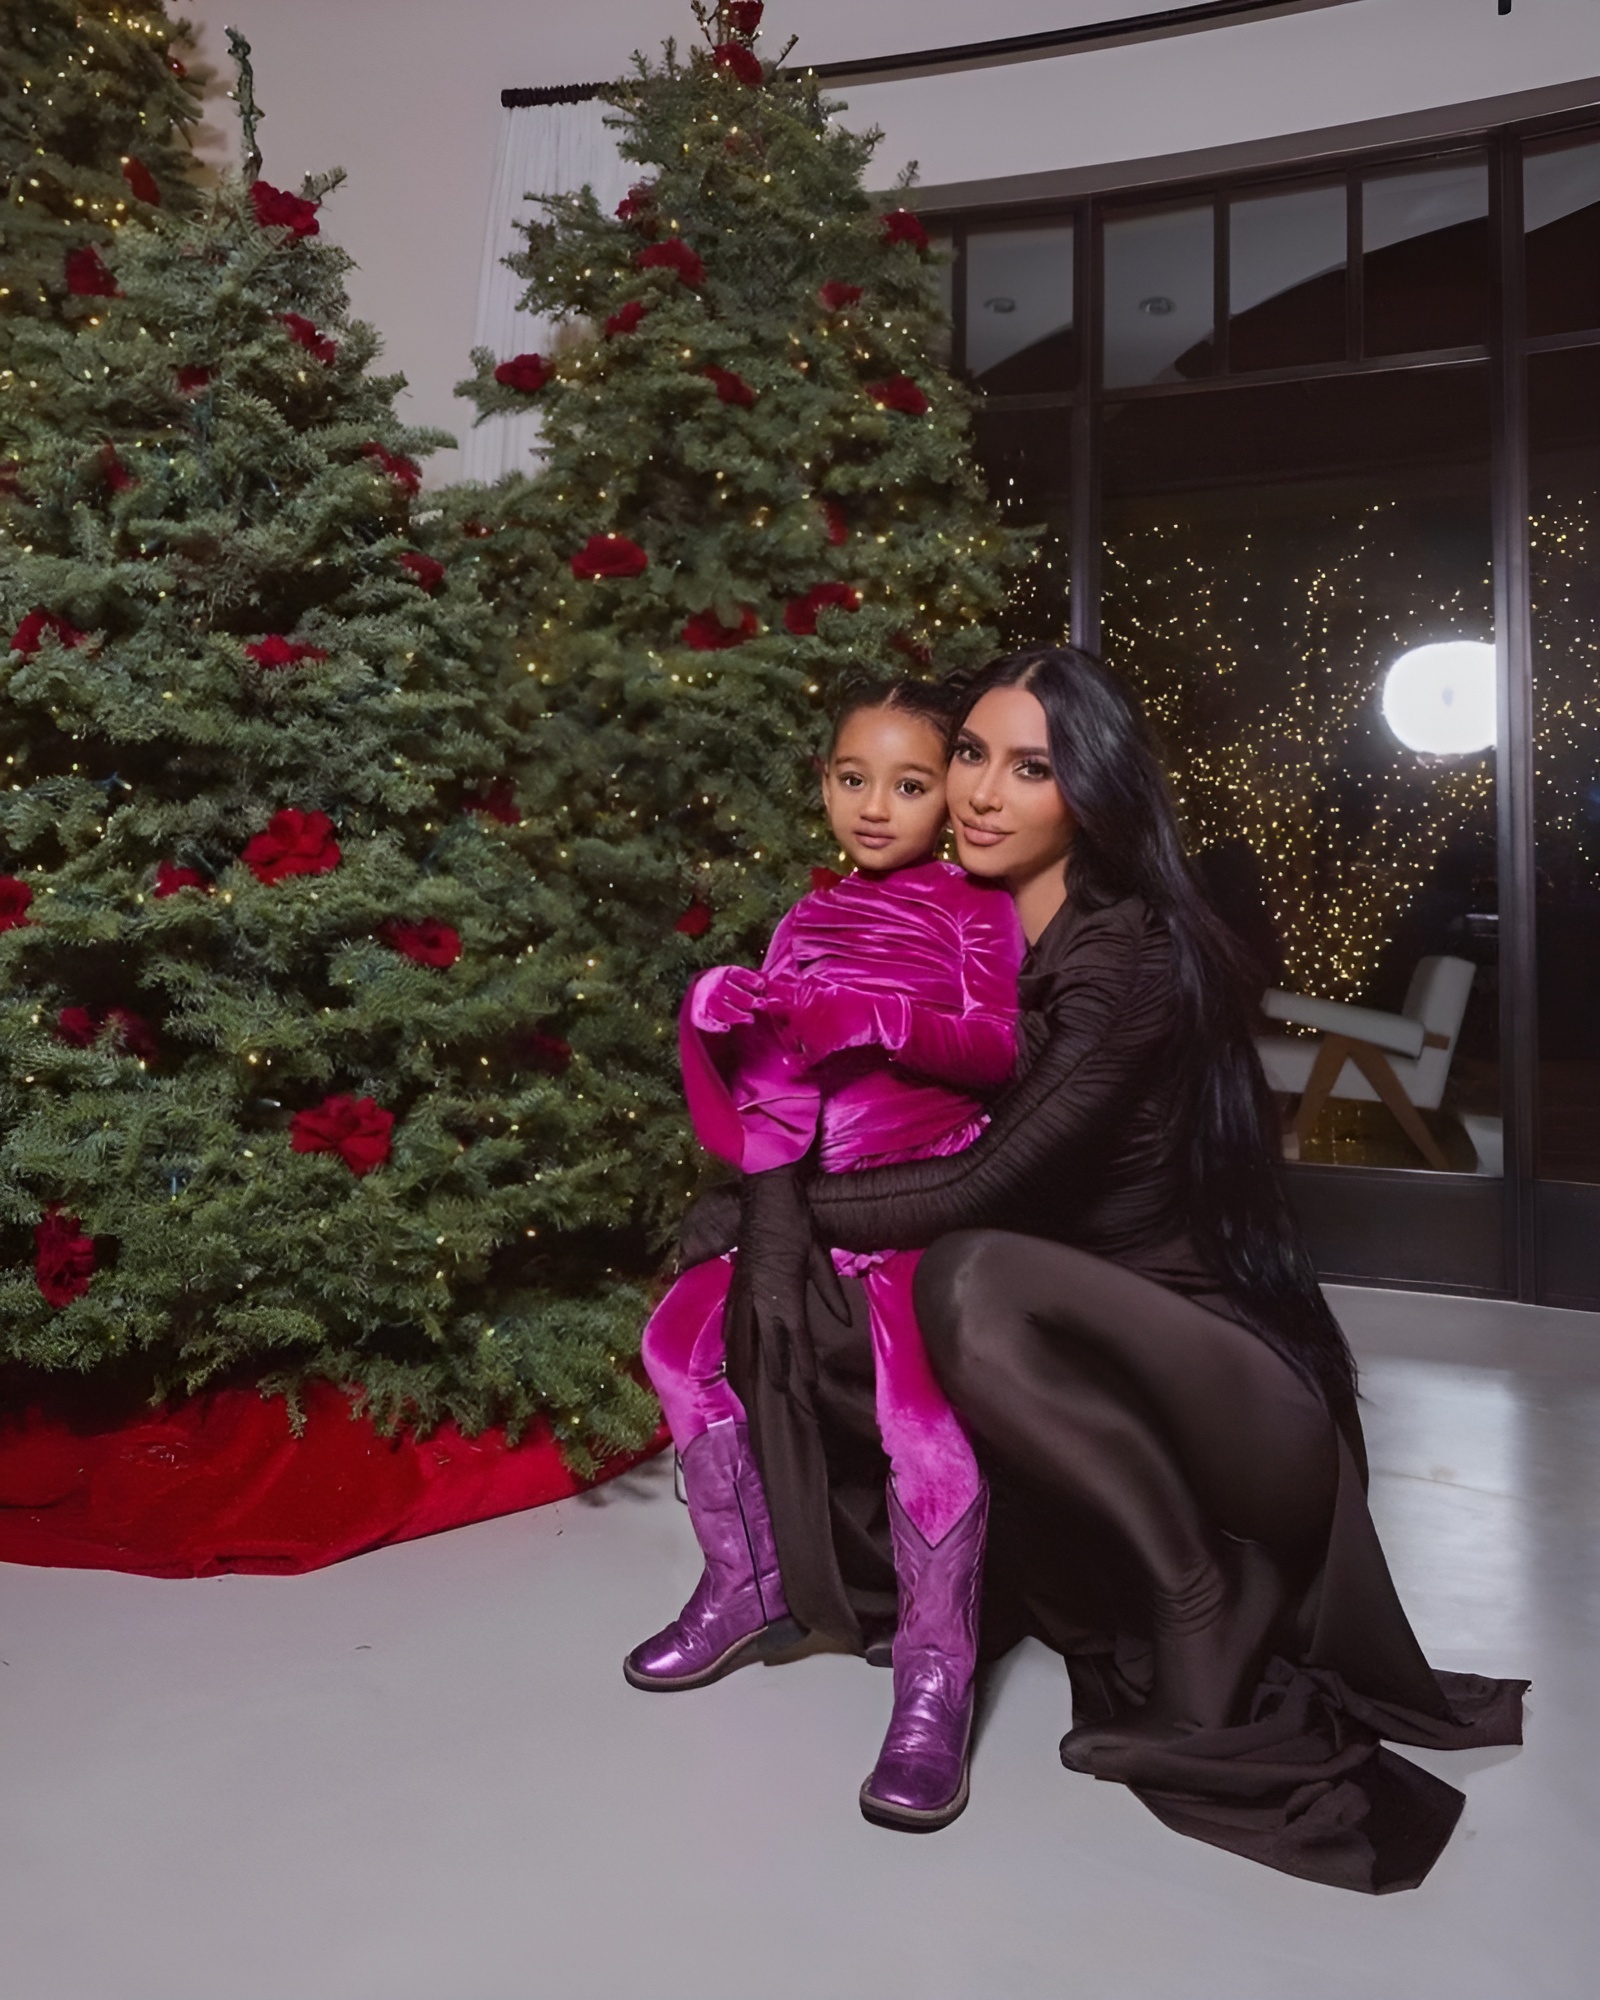 likhoa sweet chicago west next to kim kardashian and her siblings in a family photo set that makes the online community constantly praise 6539def05a2e3 Sweet Chicago West Next To Kim Kardashian And Her Siblings In A Family Photo Set That Makes The Online Community Constantly Praise